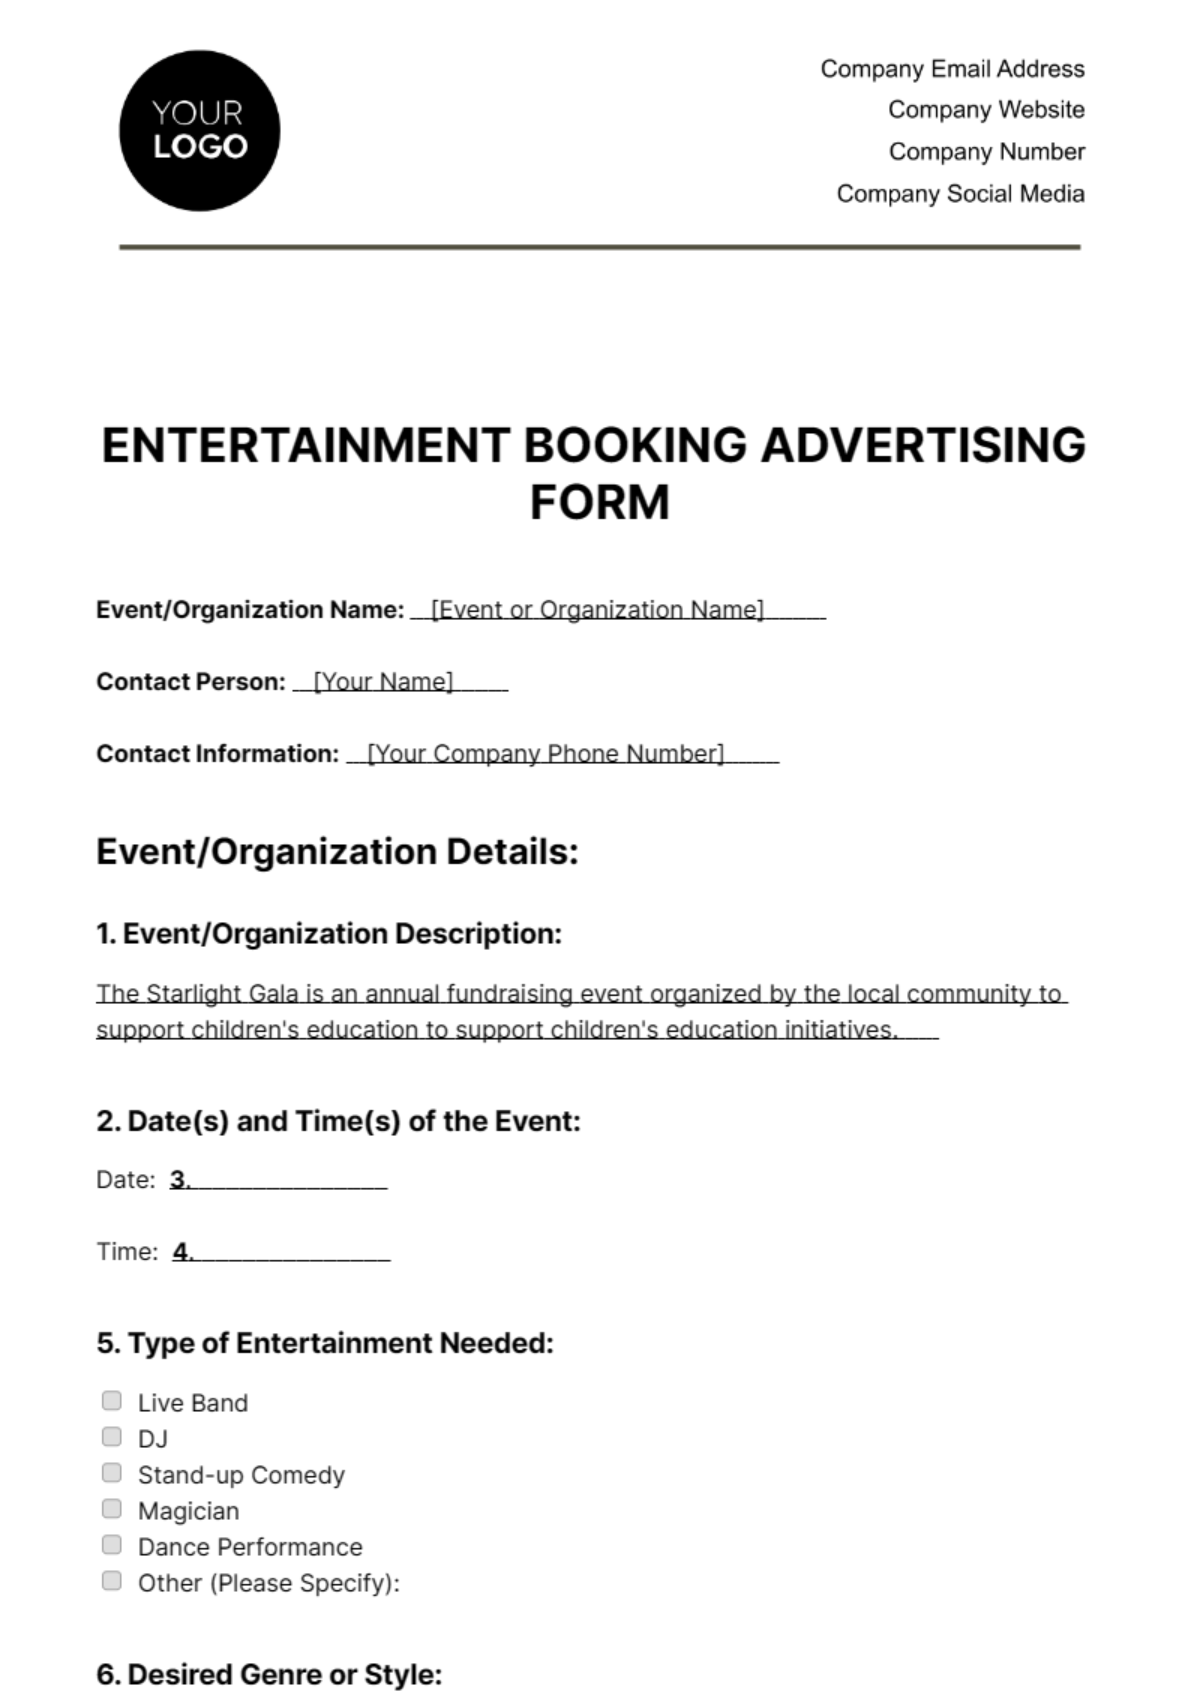 Entertainment Booking Advertising Form Template